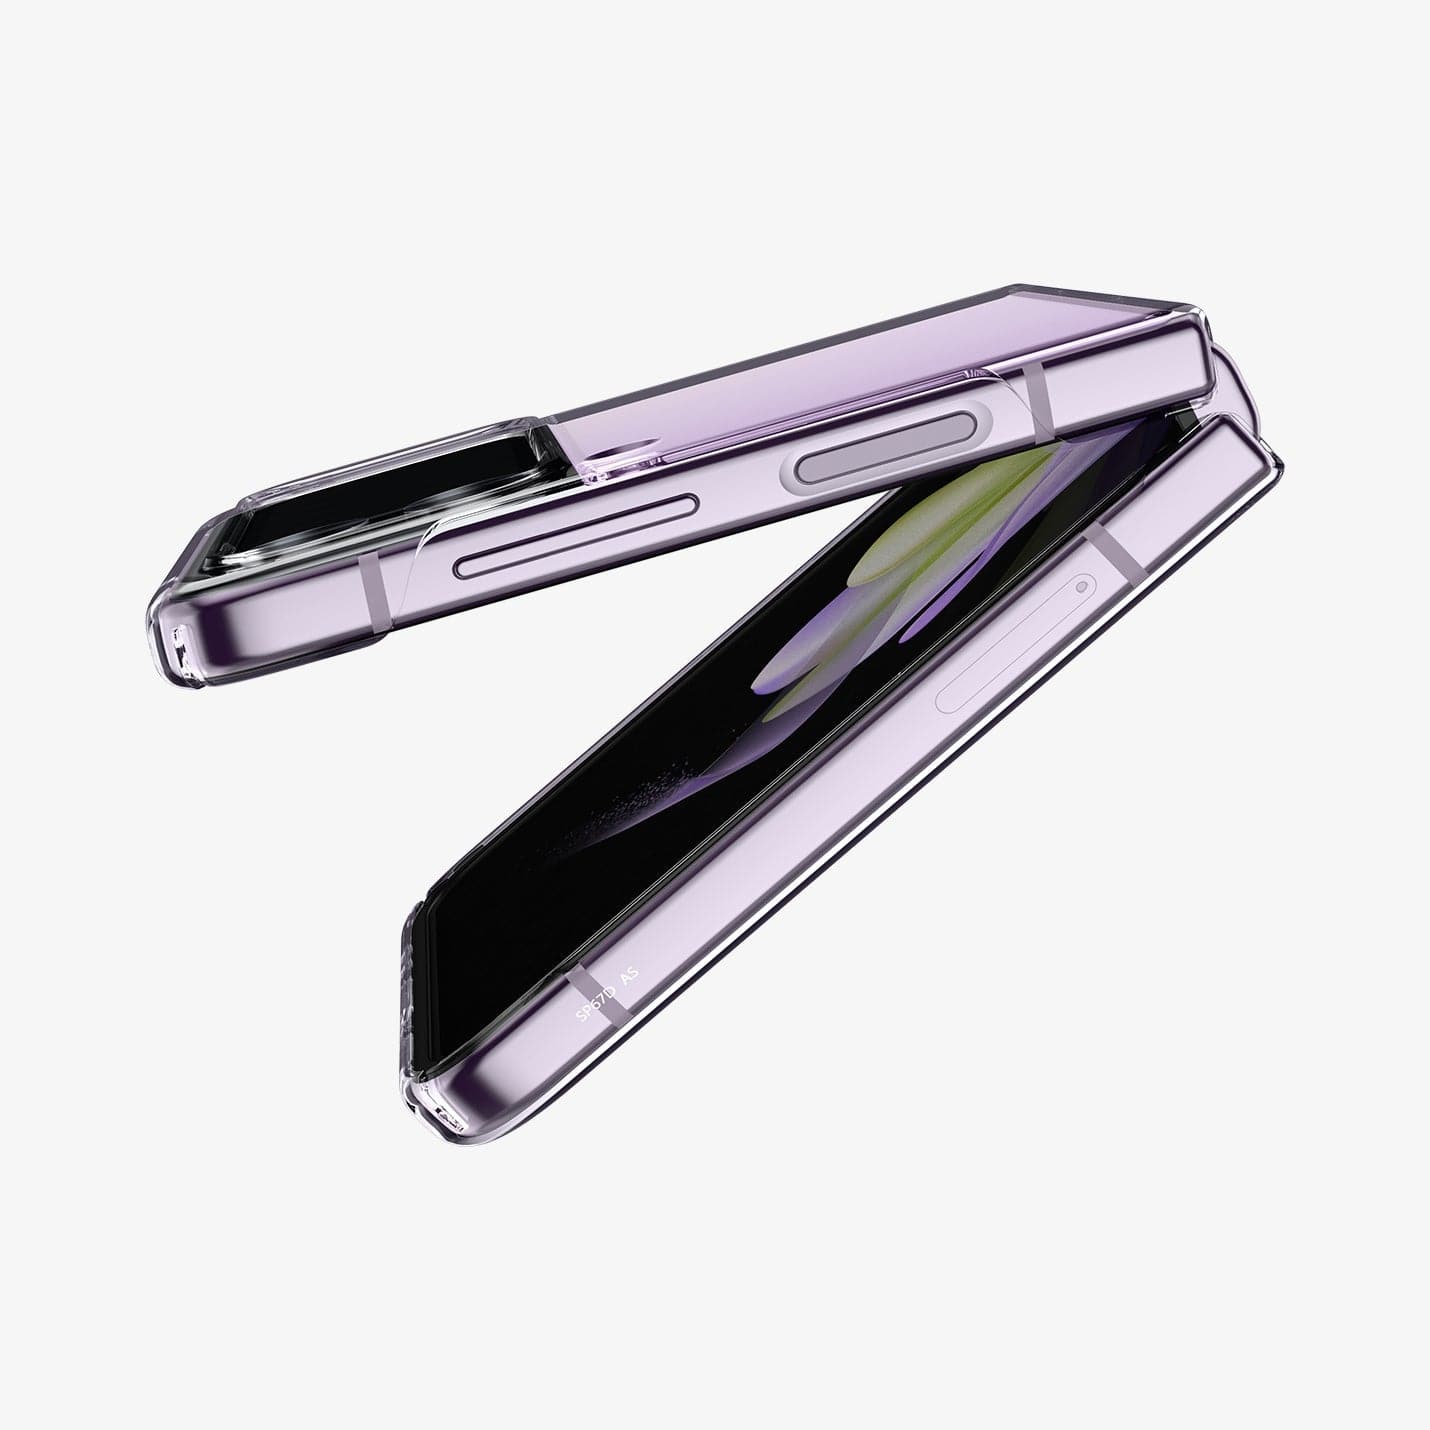 ACS05112 - Galaxy Z Flip 4 Case AirSkin in crystal clear showing the side, partial back and front with device slightly open